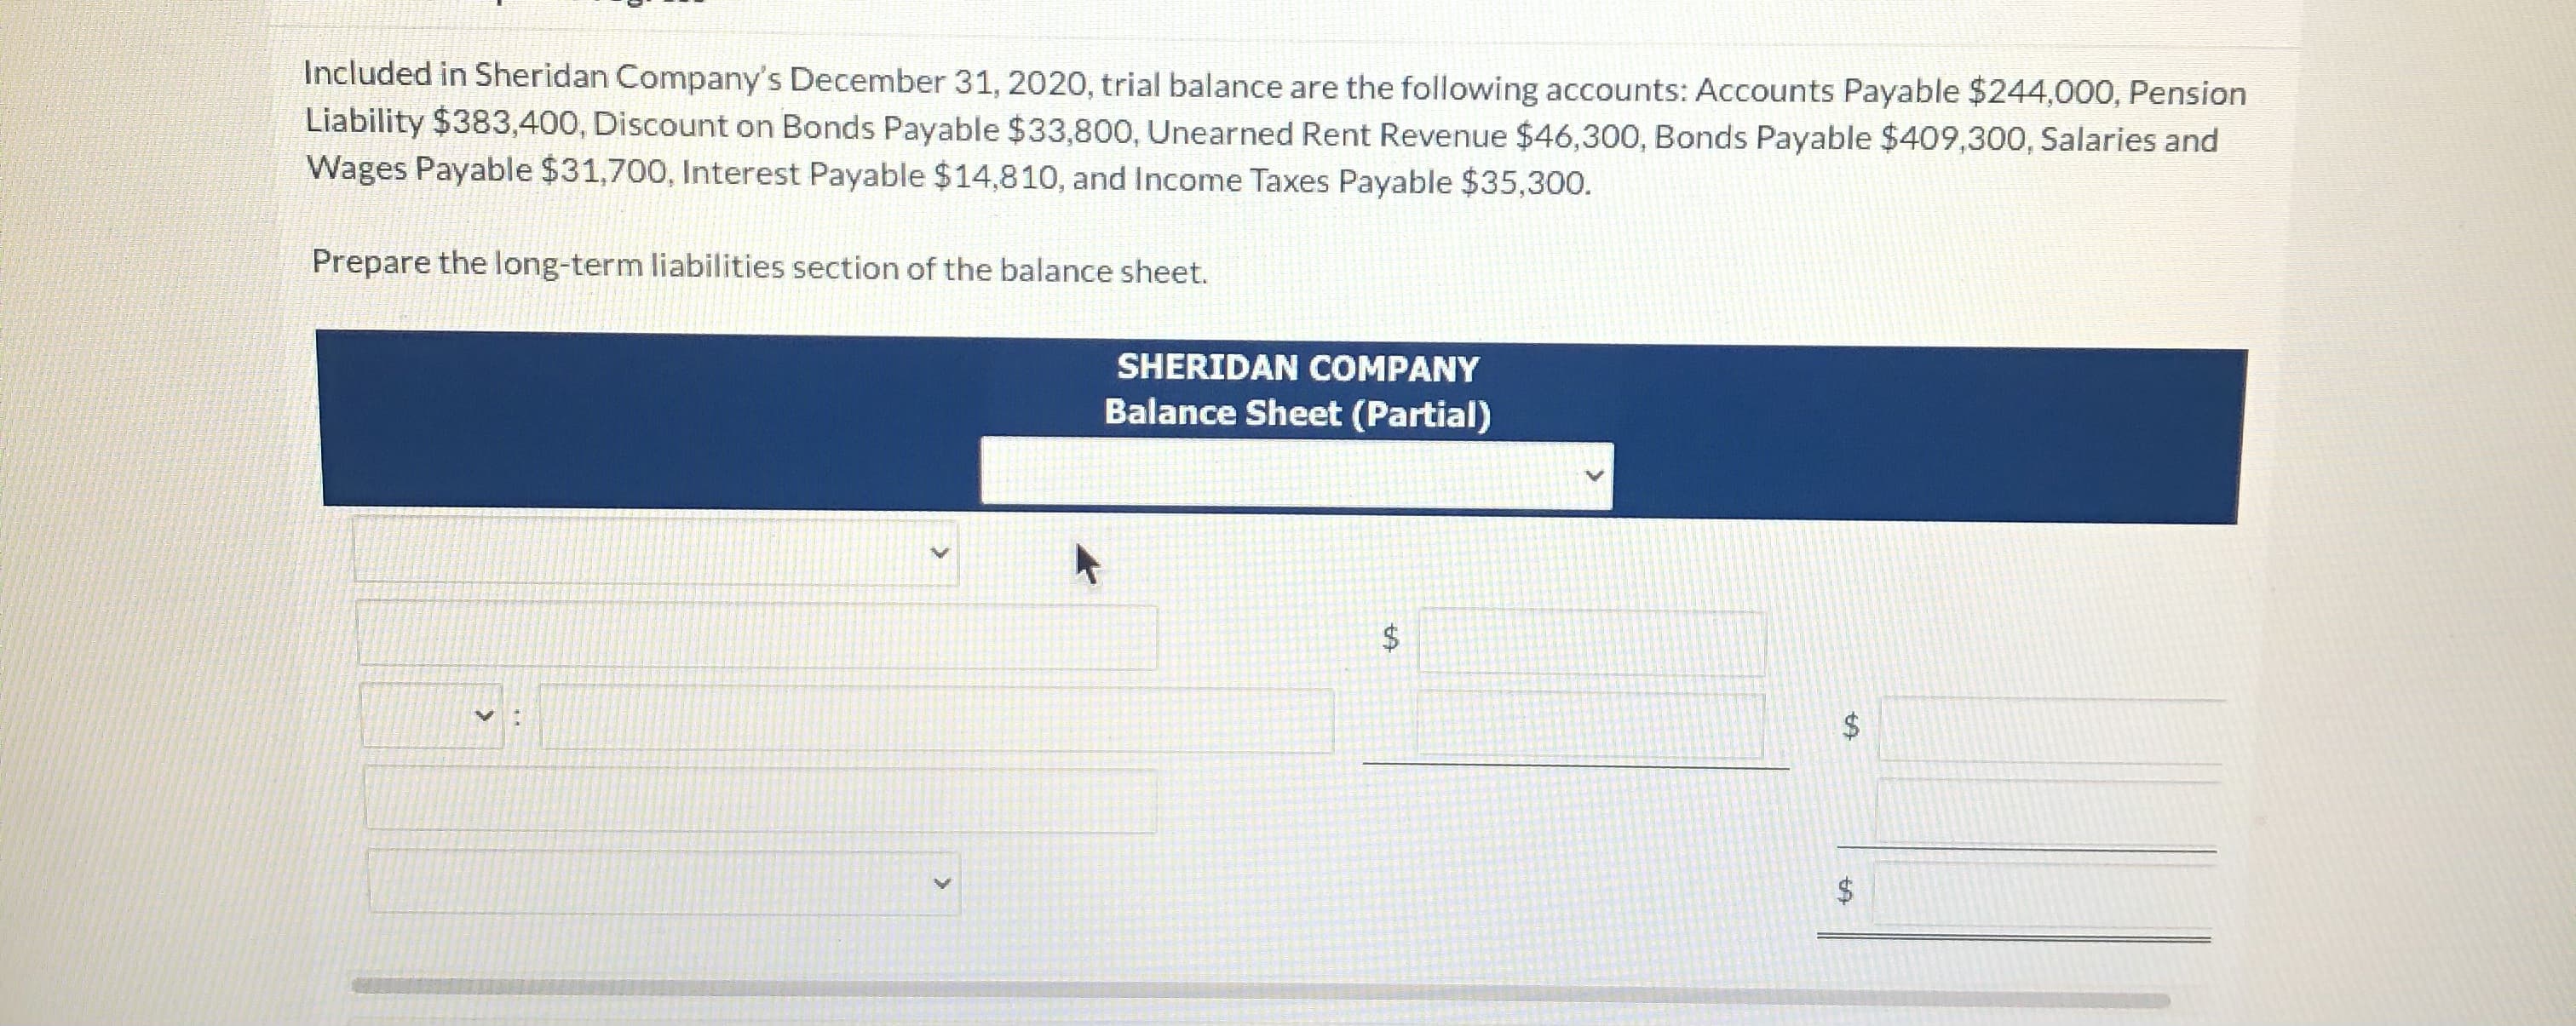 Included in Sheridan Company's December 31, 2020, trial balance are the following accounts: Accounts Payable $244,000, Pension
Liability $383,400, Discount on Bonds Payable $33,800, Unearned Rent Revenue $46,300, Bonds Payable $409,300, Salaries and
Wages Payable $31,700, Interest Payable $14,810, and Income Taxes Payable $35,300.
Prepare the long-term liabilities section of the balance sheet.
SHERIDAN COMPANY
Balance Sheet (Partial)
%24
%24
%24
